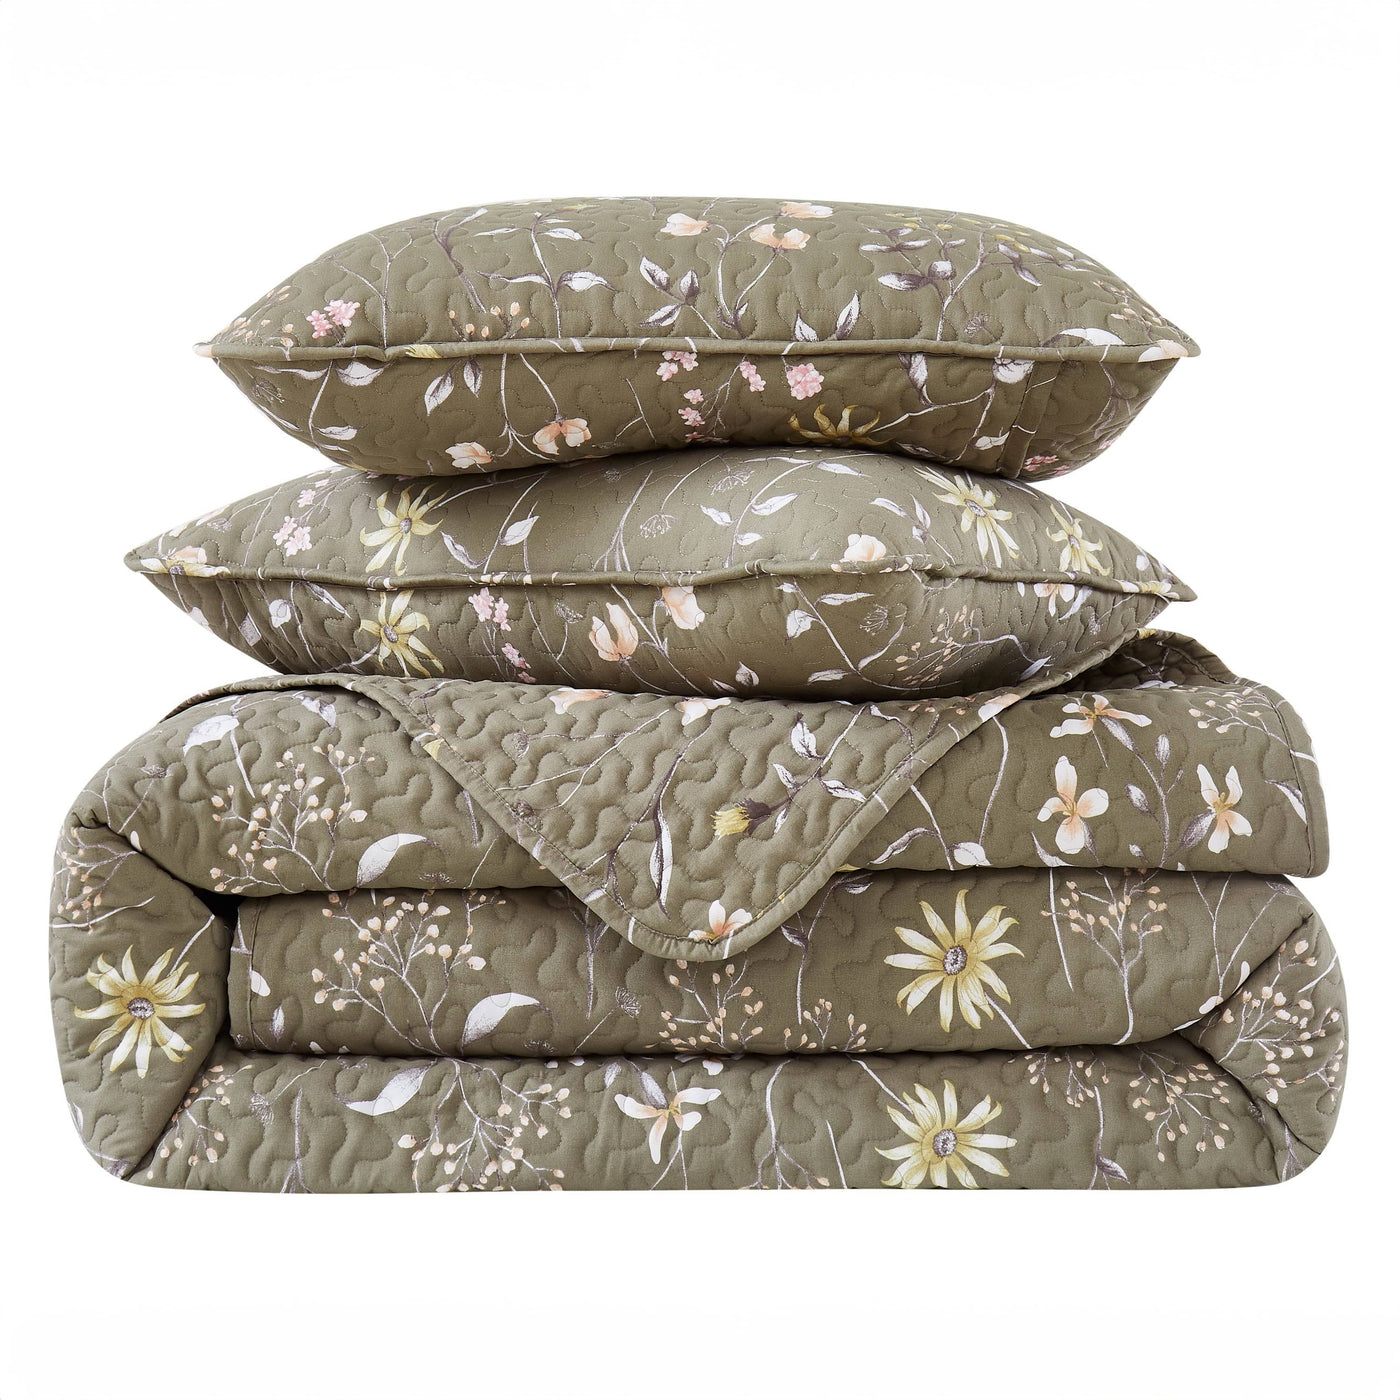 Stack Image of Secret Meadow Quilt Set in olive-brown#color_secret-meadow-olive-brown